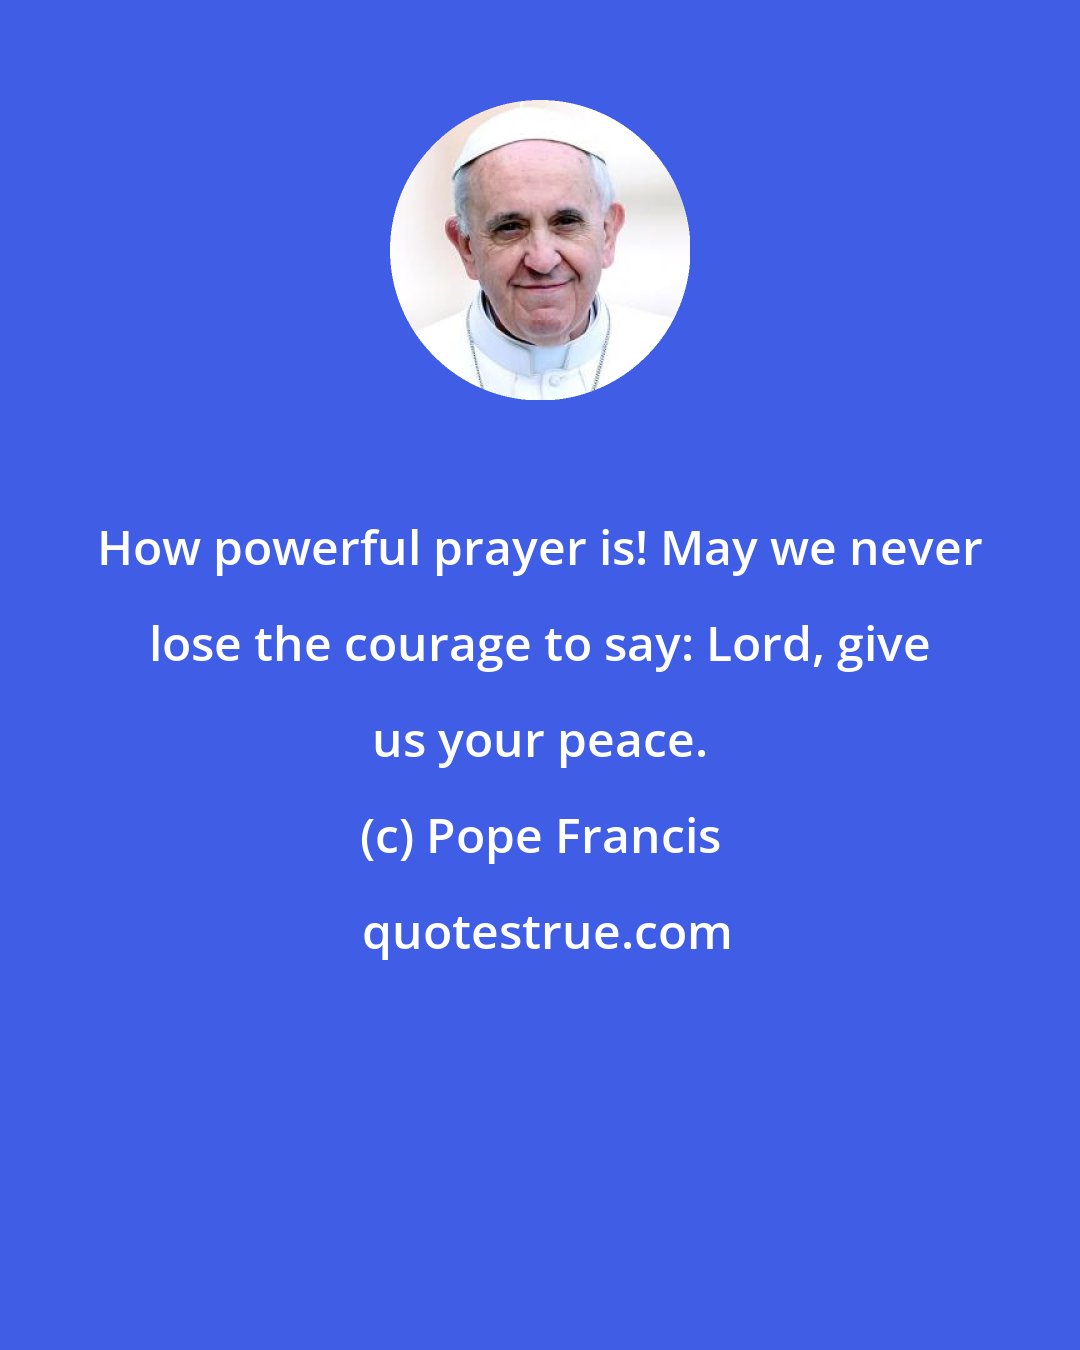 Pope Francis: How powerful prayer is! May we never lose the courage to say: Lord, give us your peace.